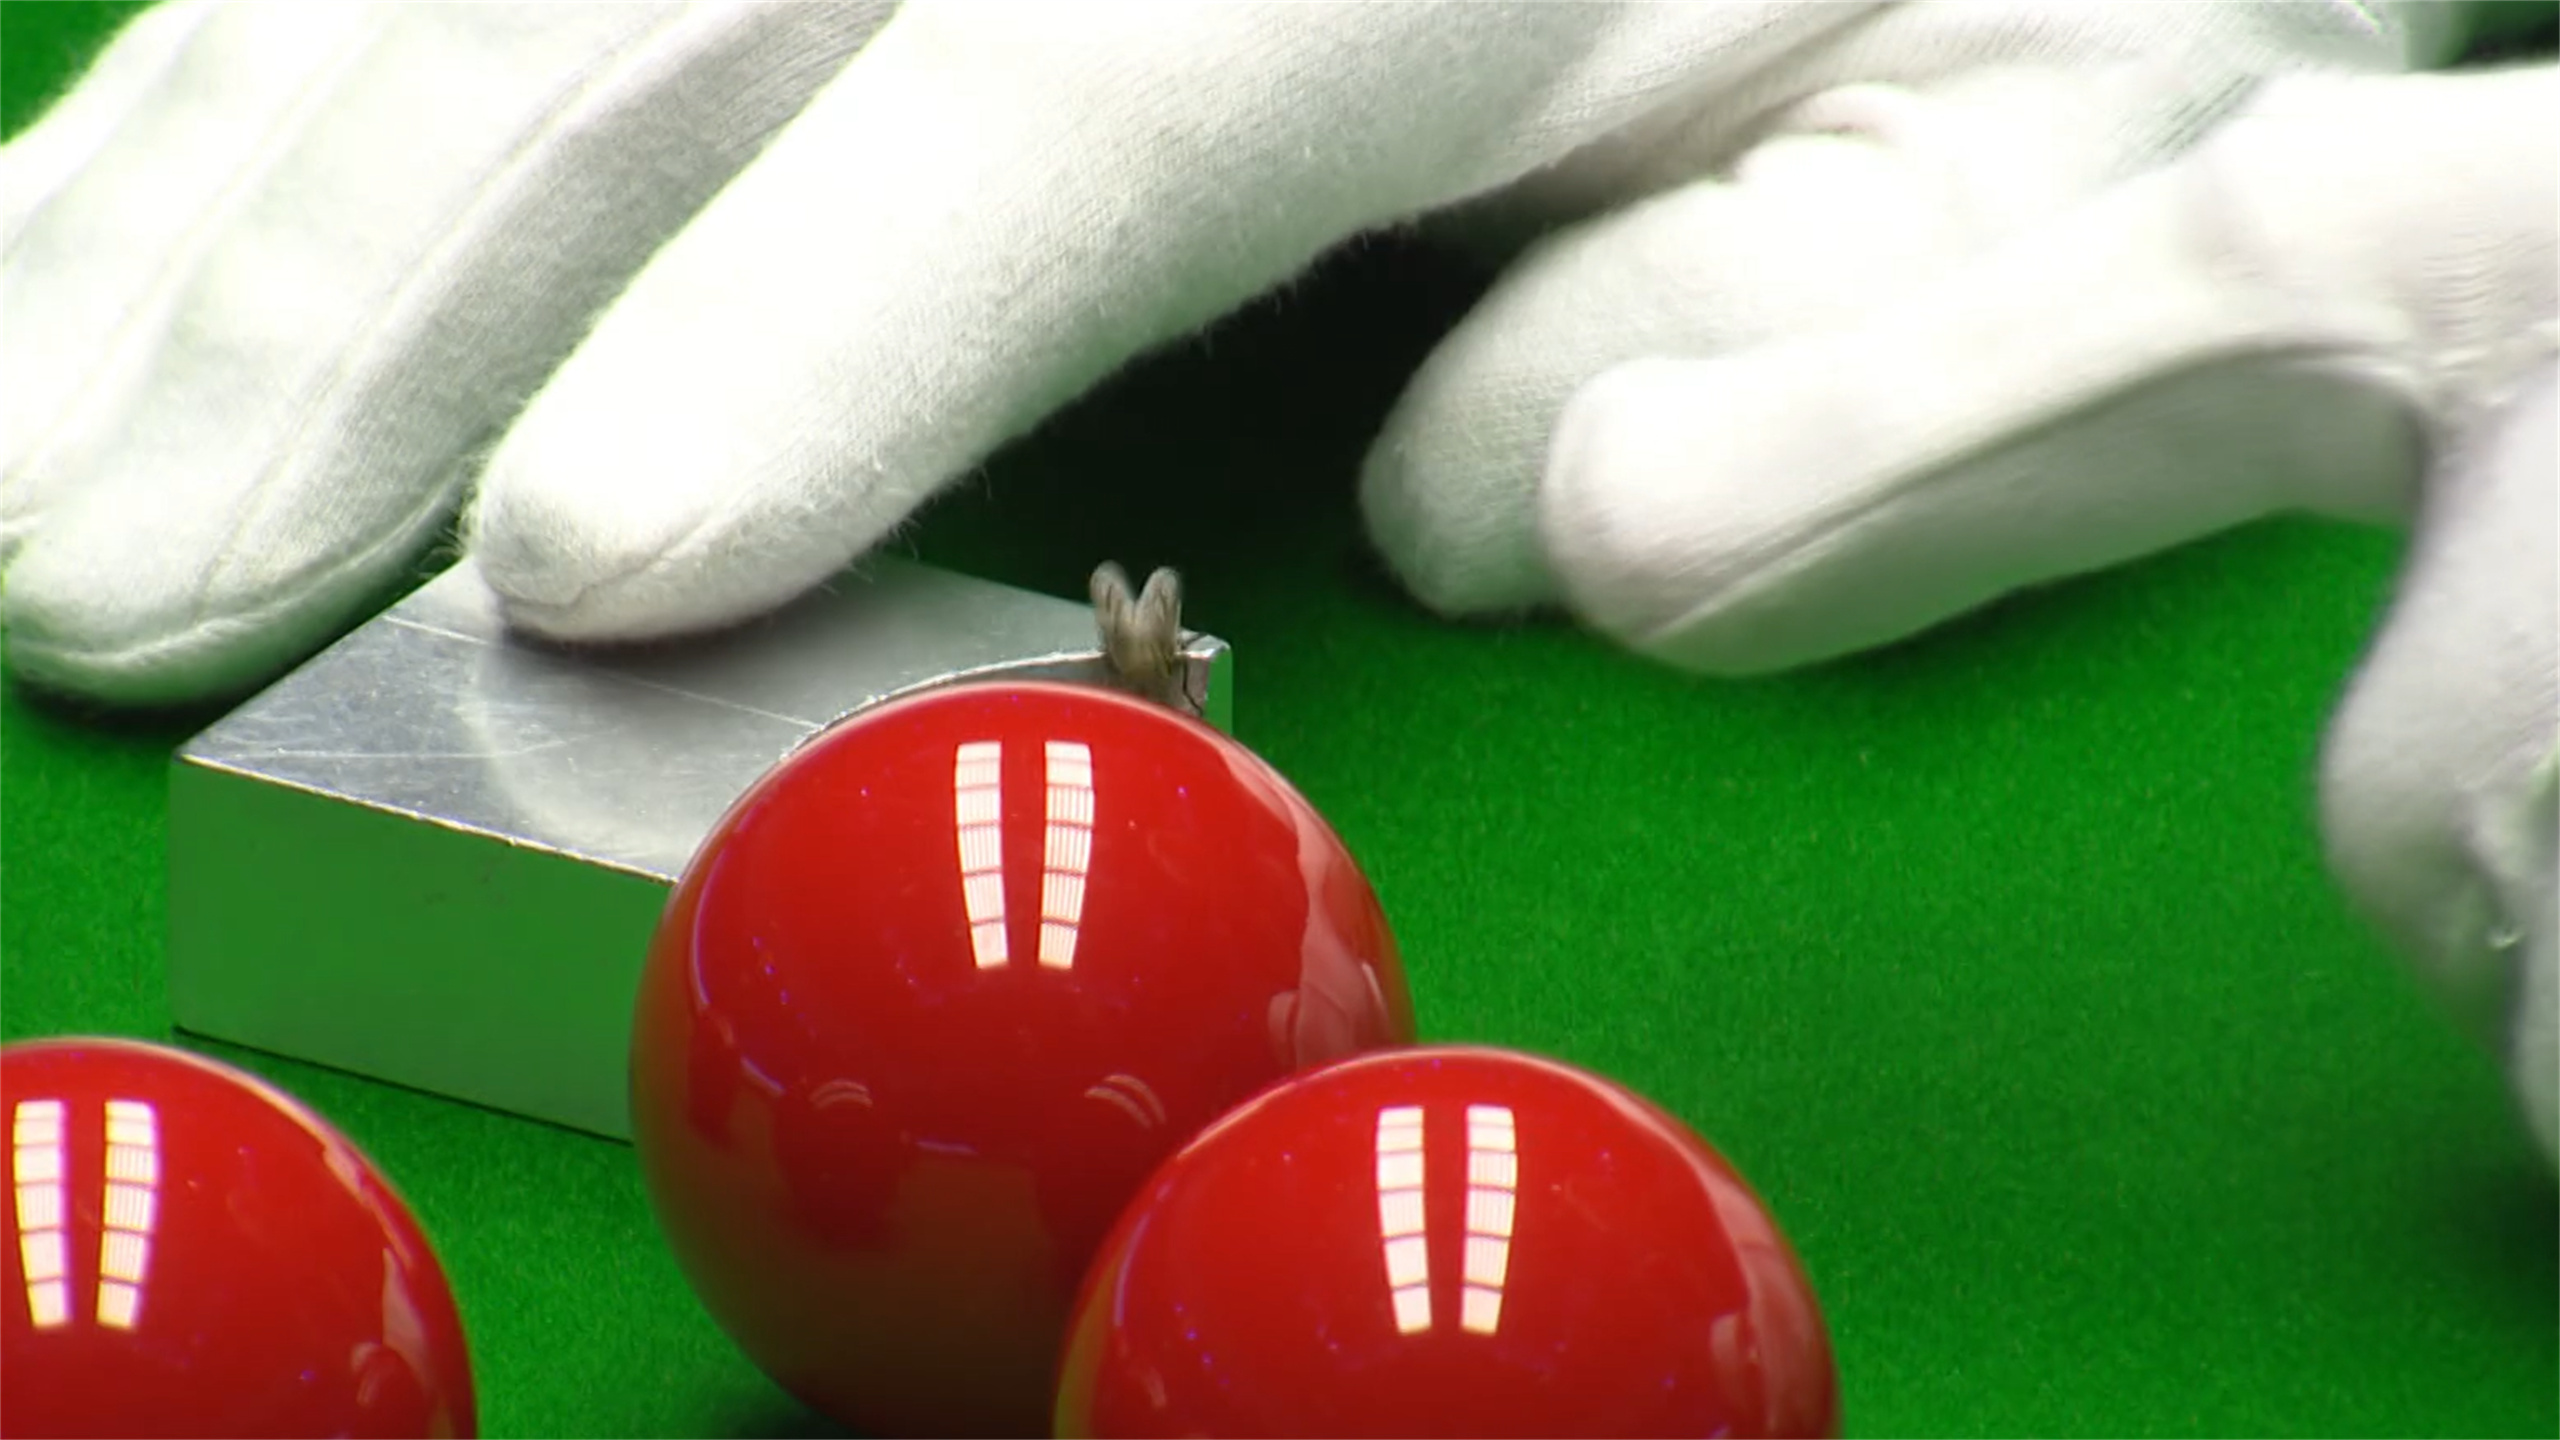 Snooker: Competitive cue sports, Fifteen-reds game, Internationally practiced recreational activity. 2560x1440 HD Wallpaper.